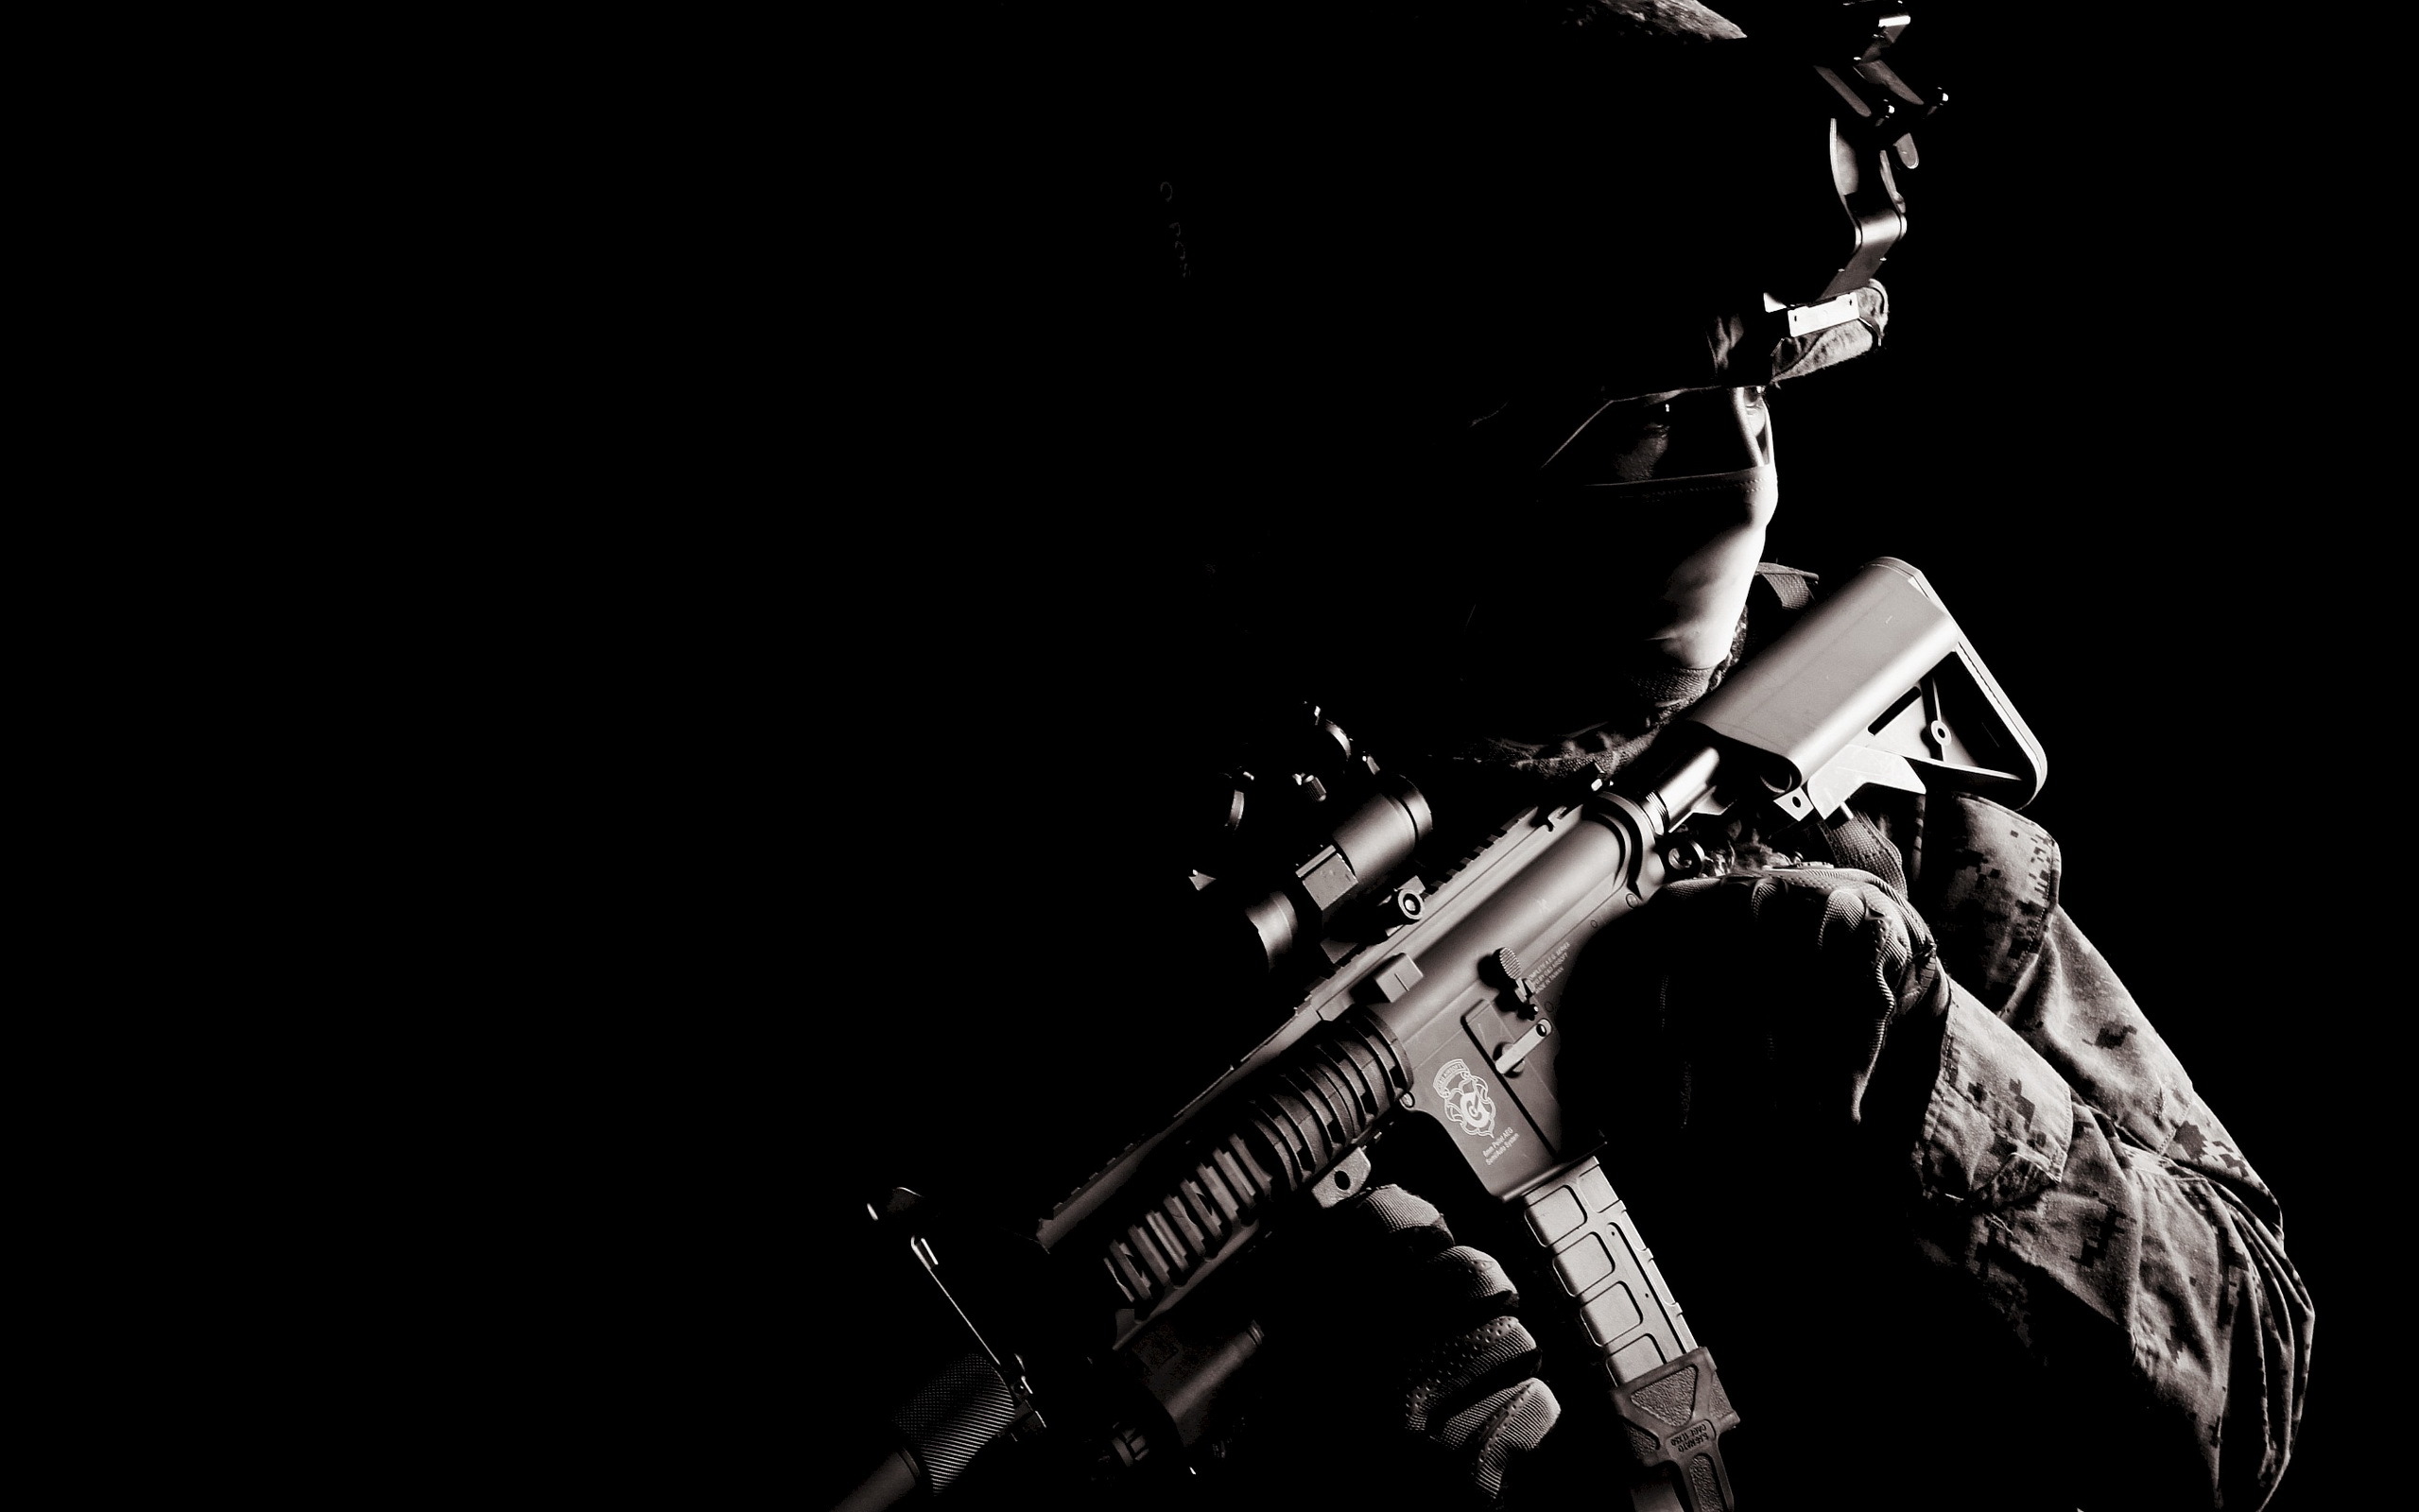 What is the official website for Navy Seals?